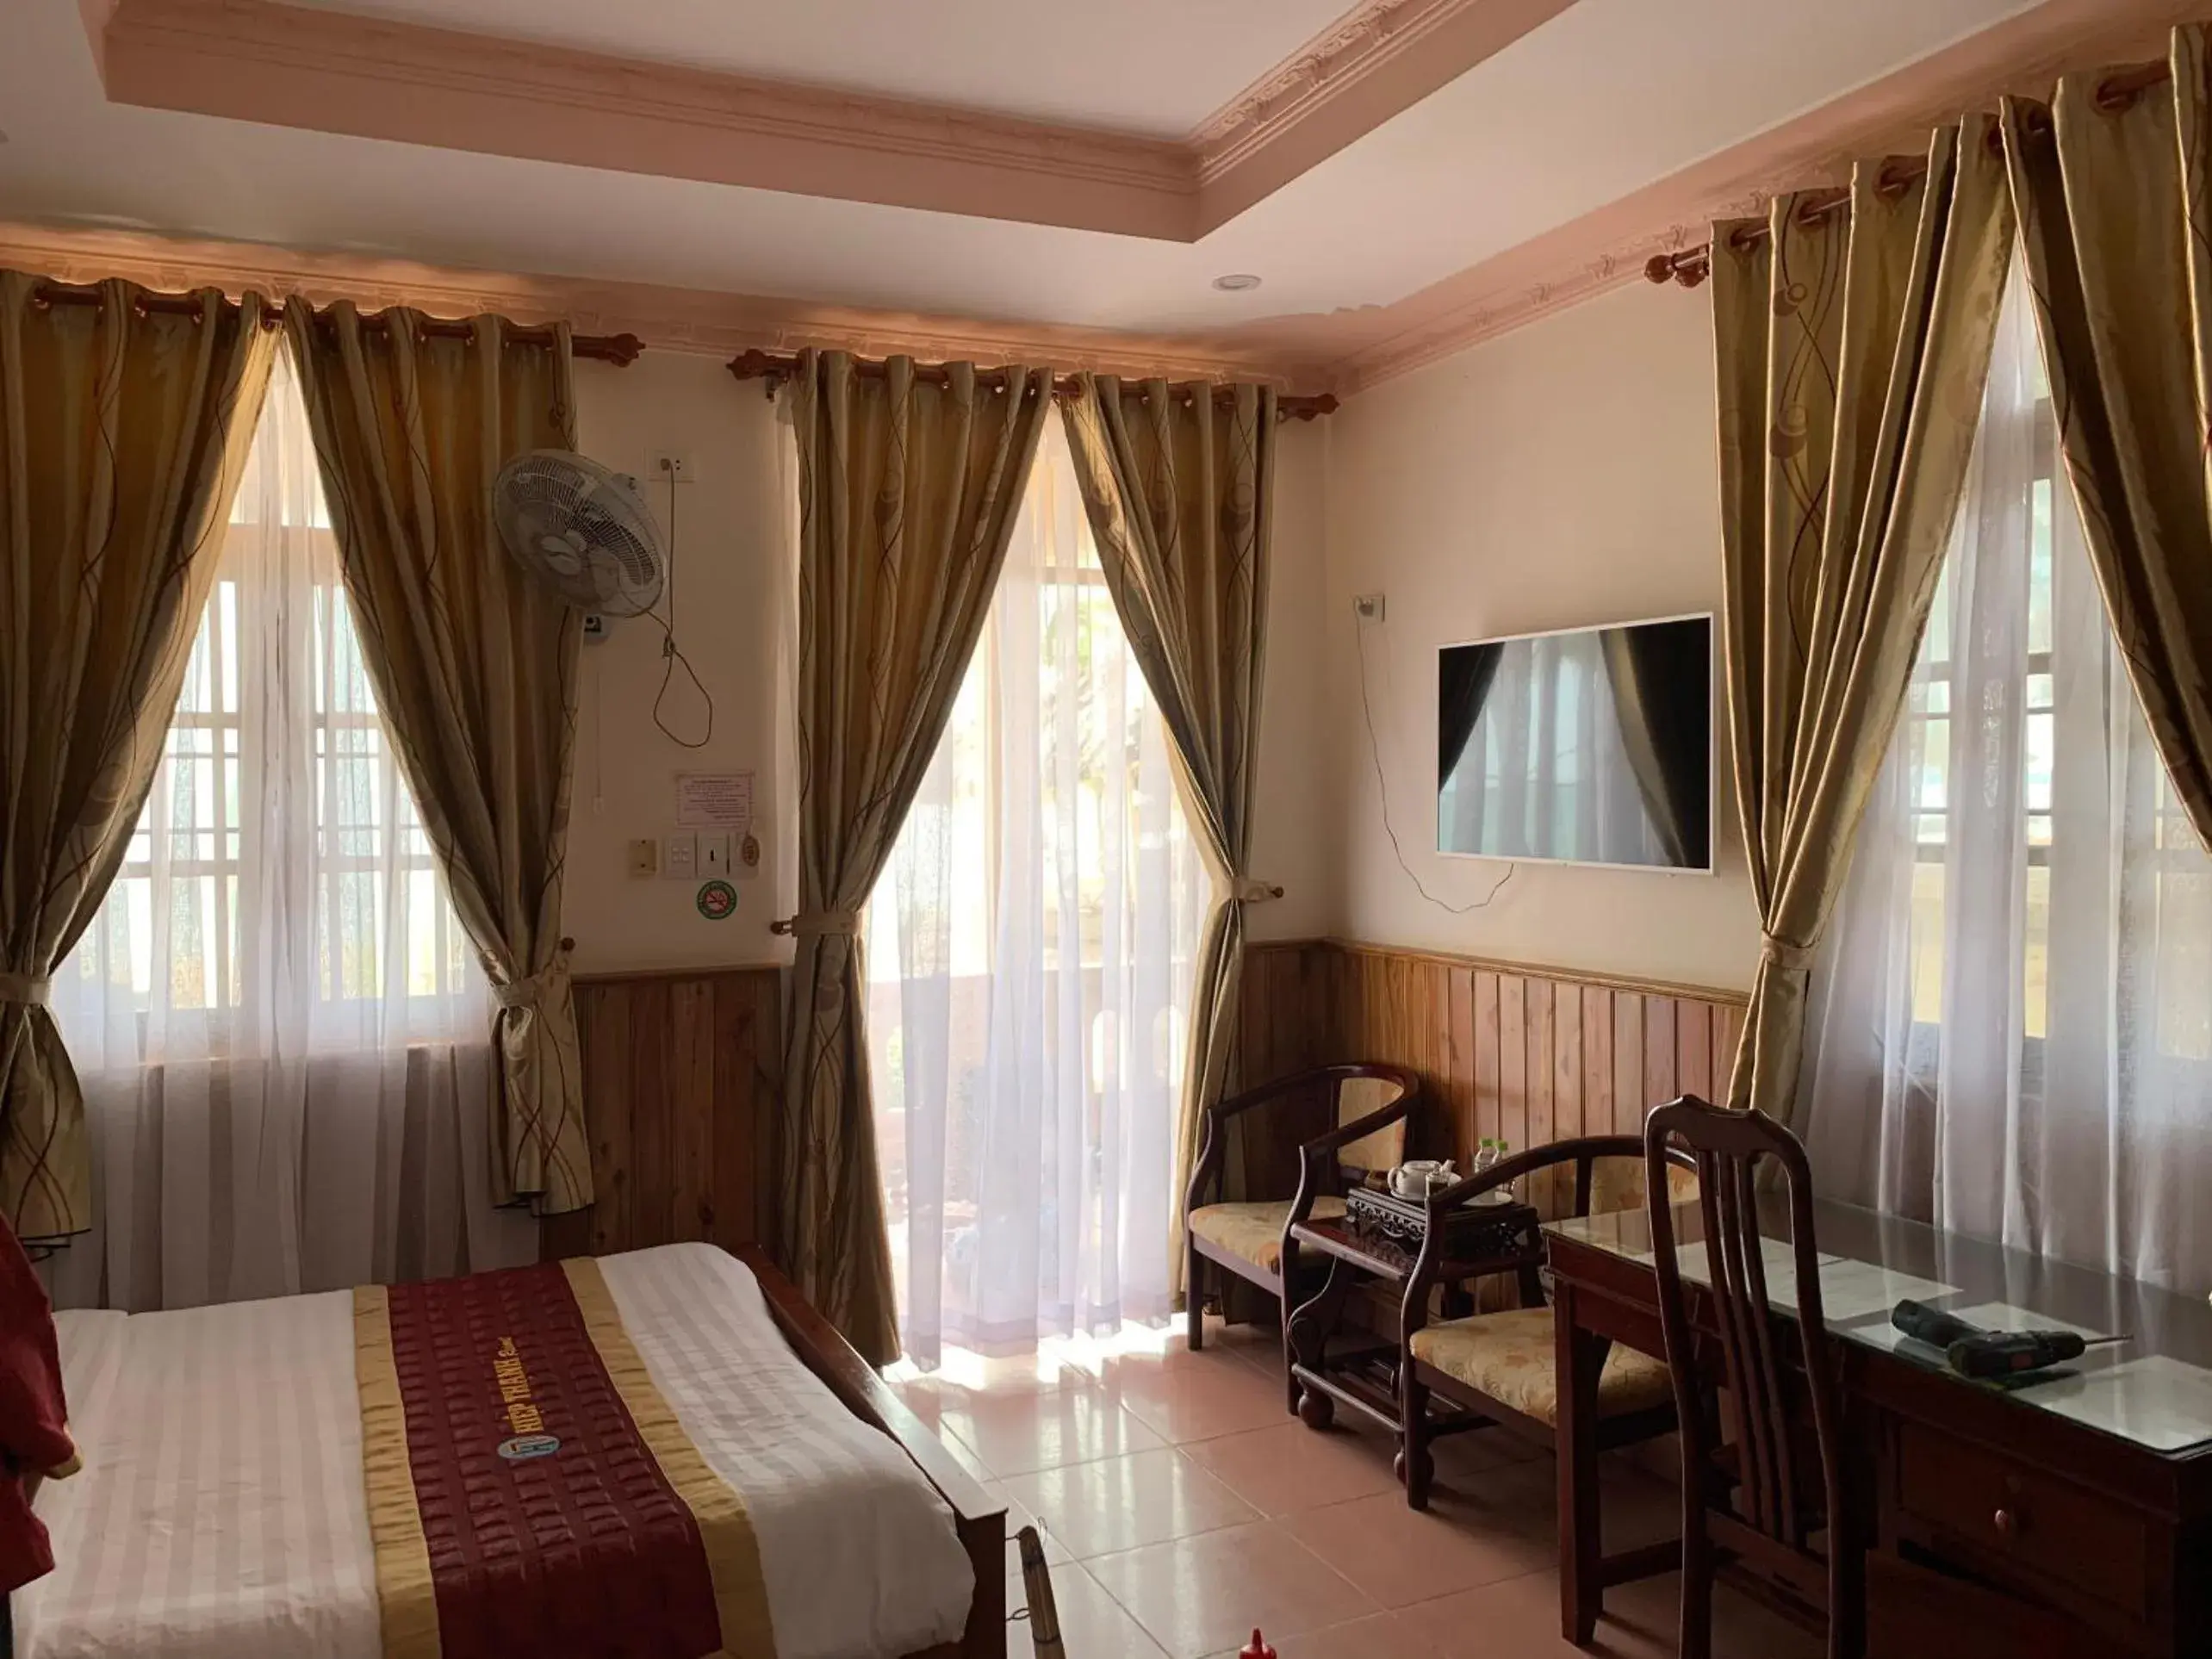 Room Photo in Hiep Thanh Resort